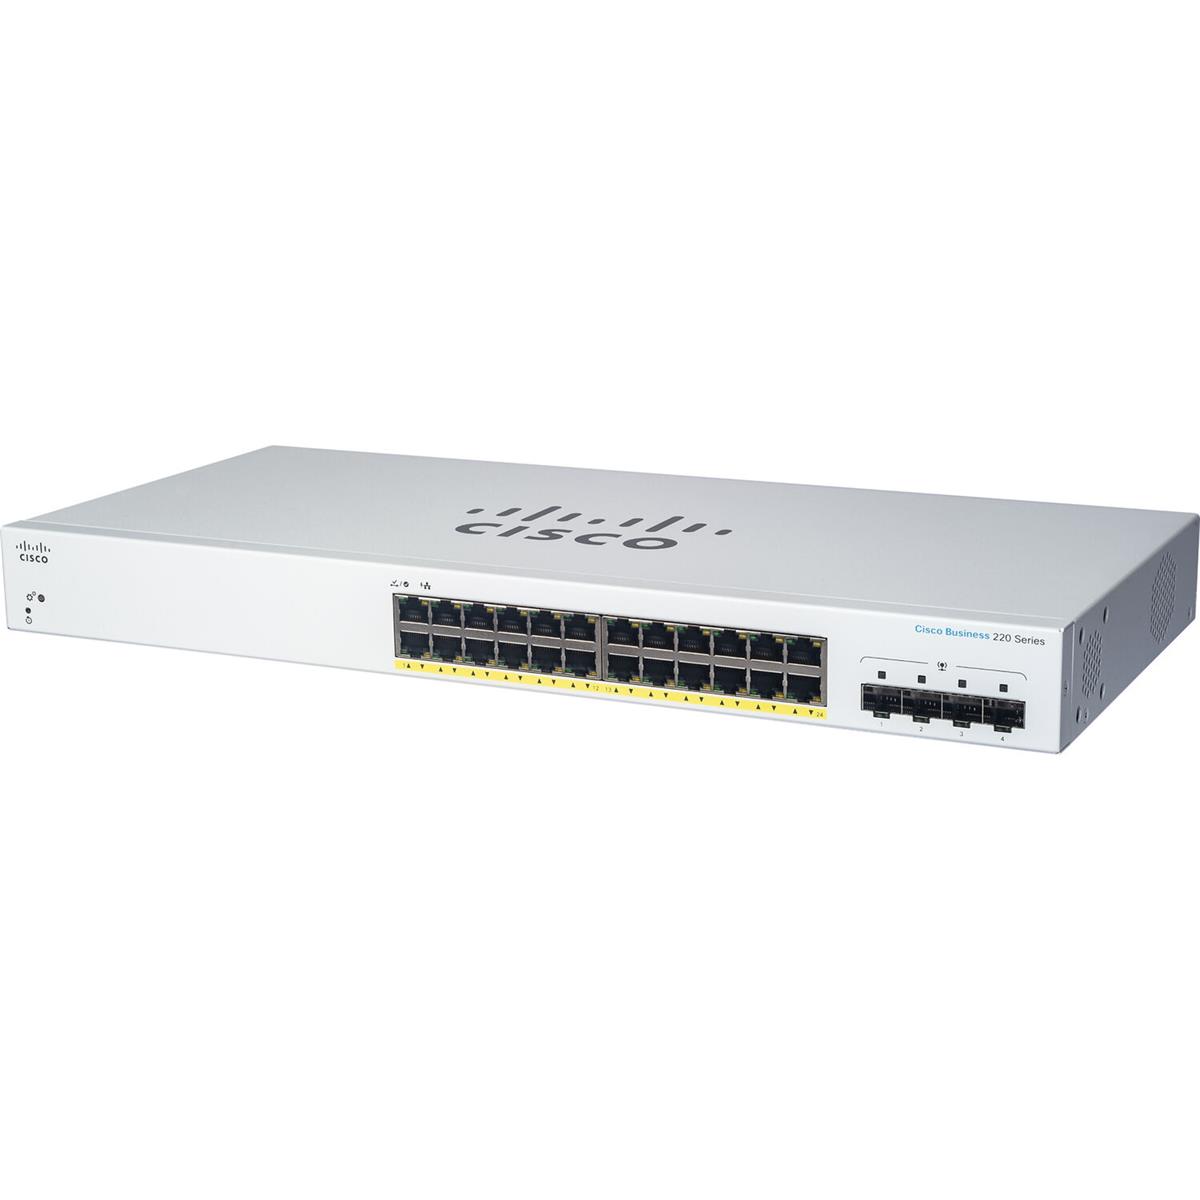 Image of Cisco CBS220-24T-4G 24-Port Gigabit Managed Network Switch with SFP